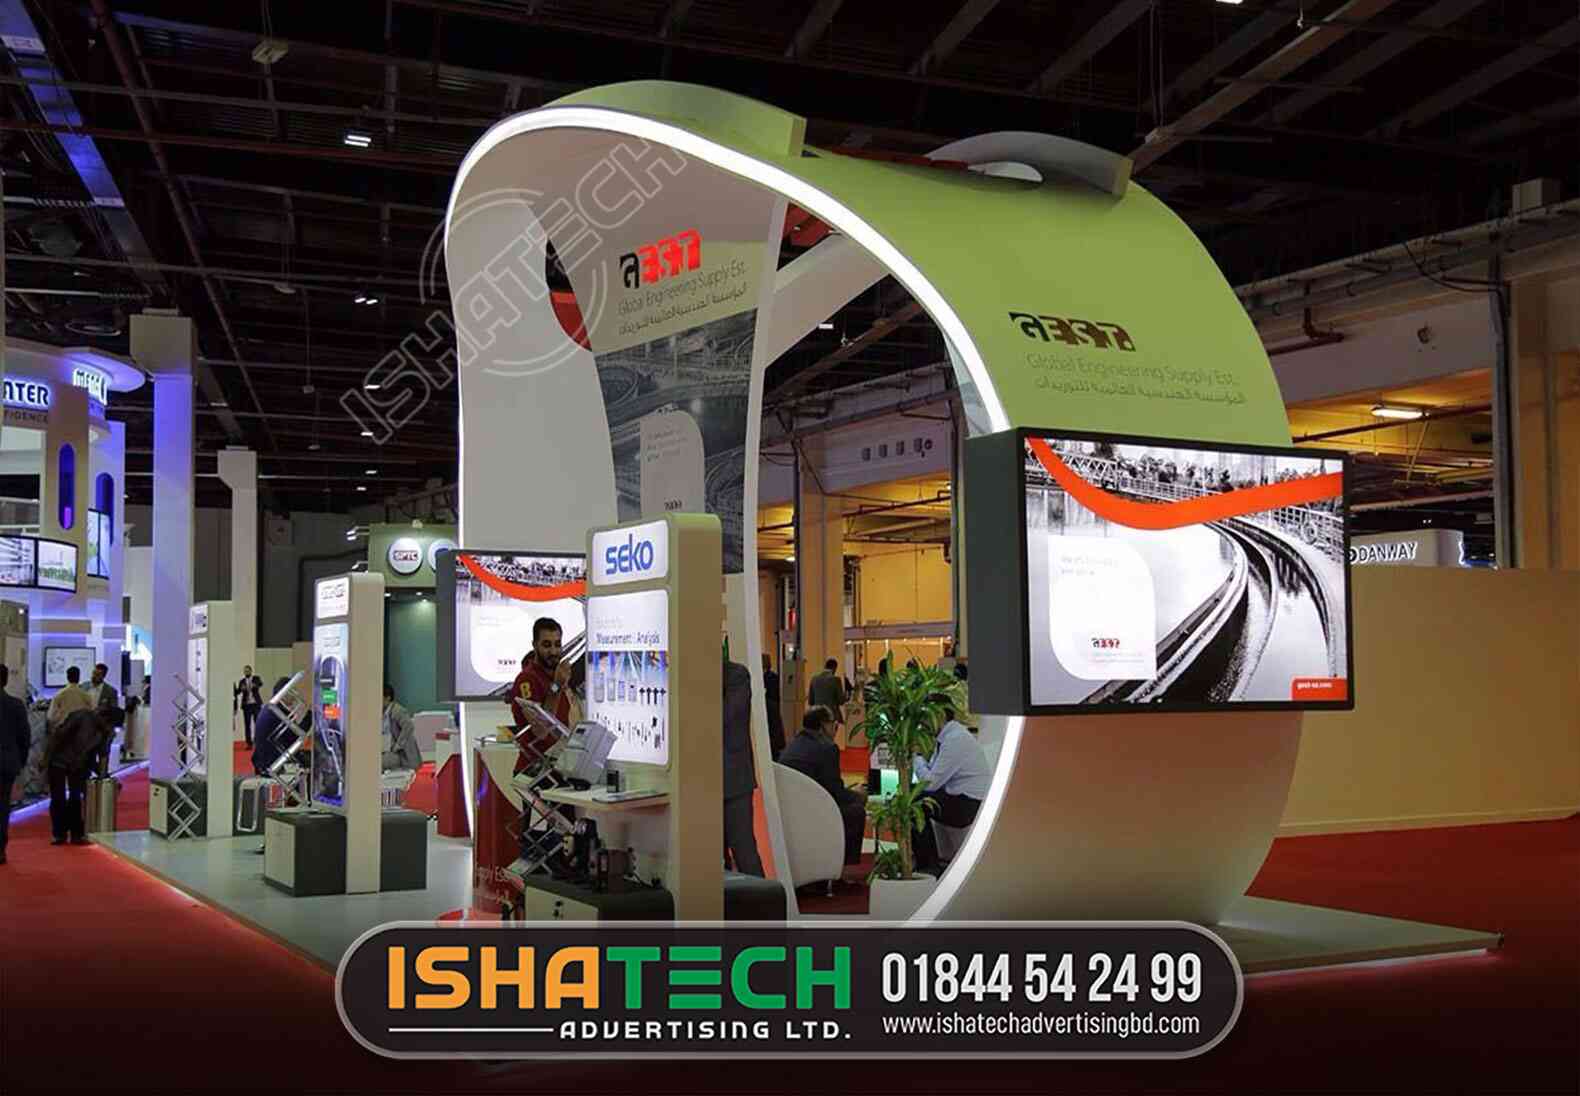 Exhibition Stall Fabrication | Fair Stall Stand Builder | Trade Fair | Booth Contractors & Stall Design Company In Dhaka, Bangladesh.